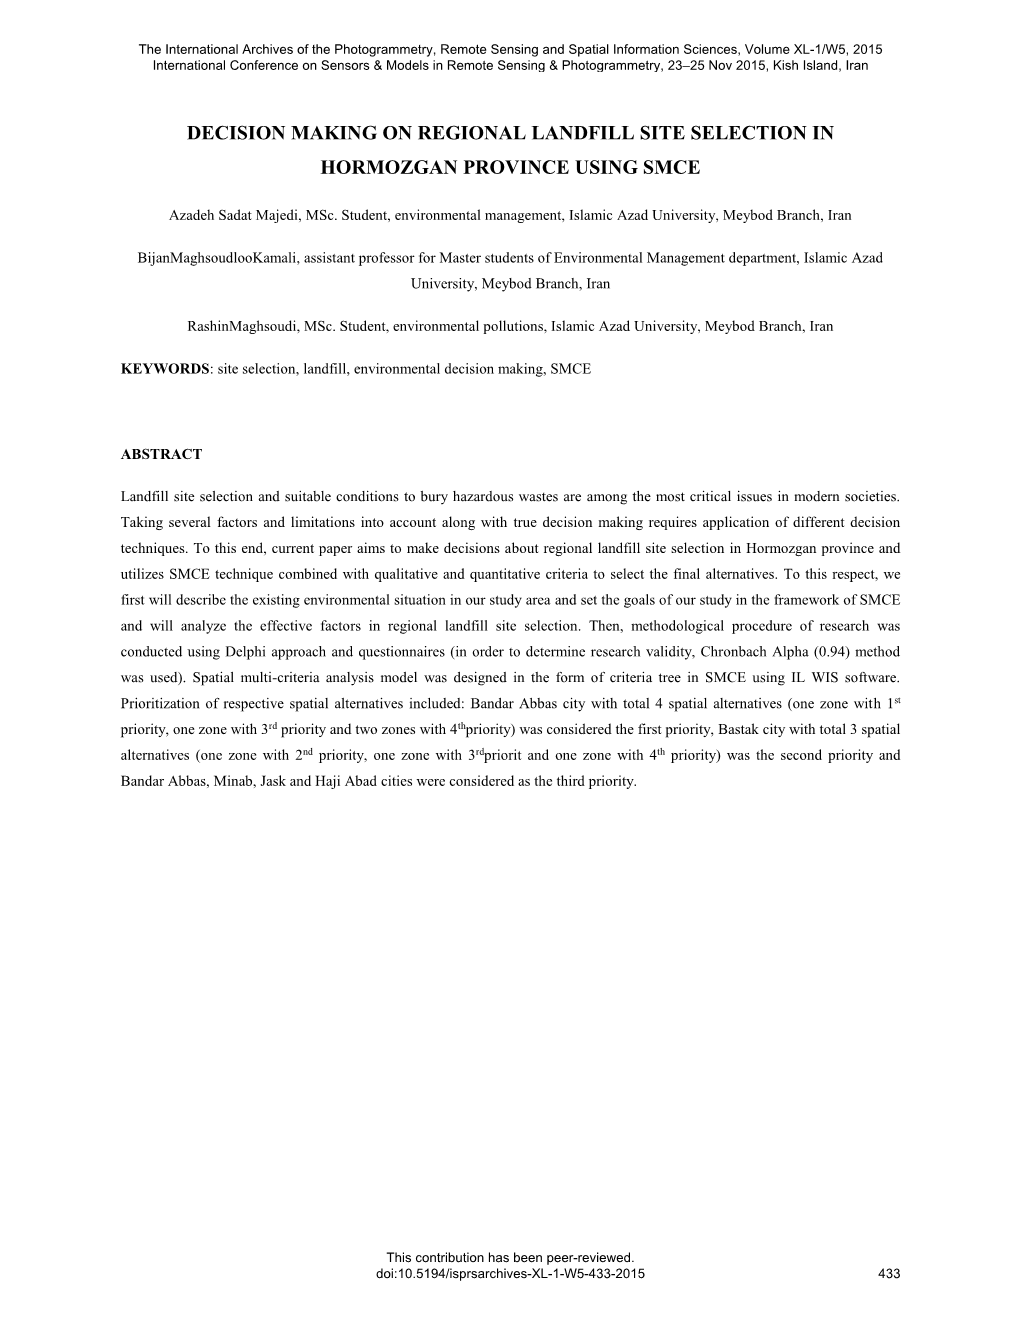 Decision Making on Regional Landfill Site Selection in Hormozgan Province Using Smce